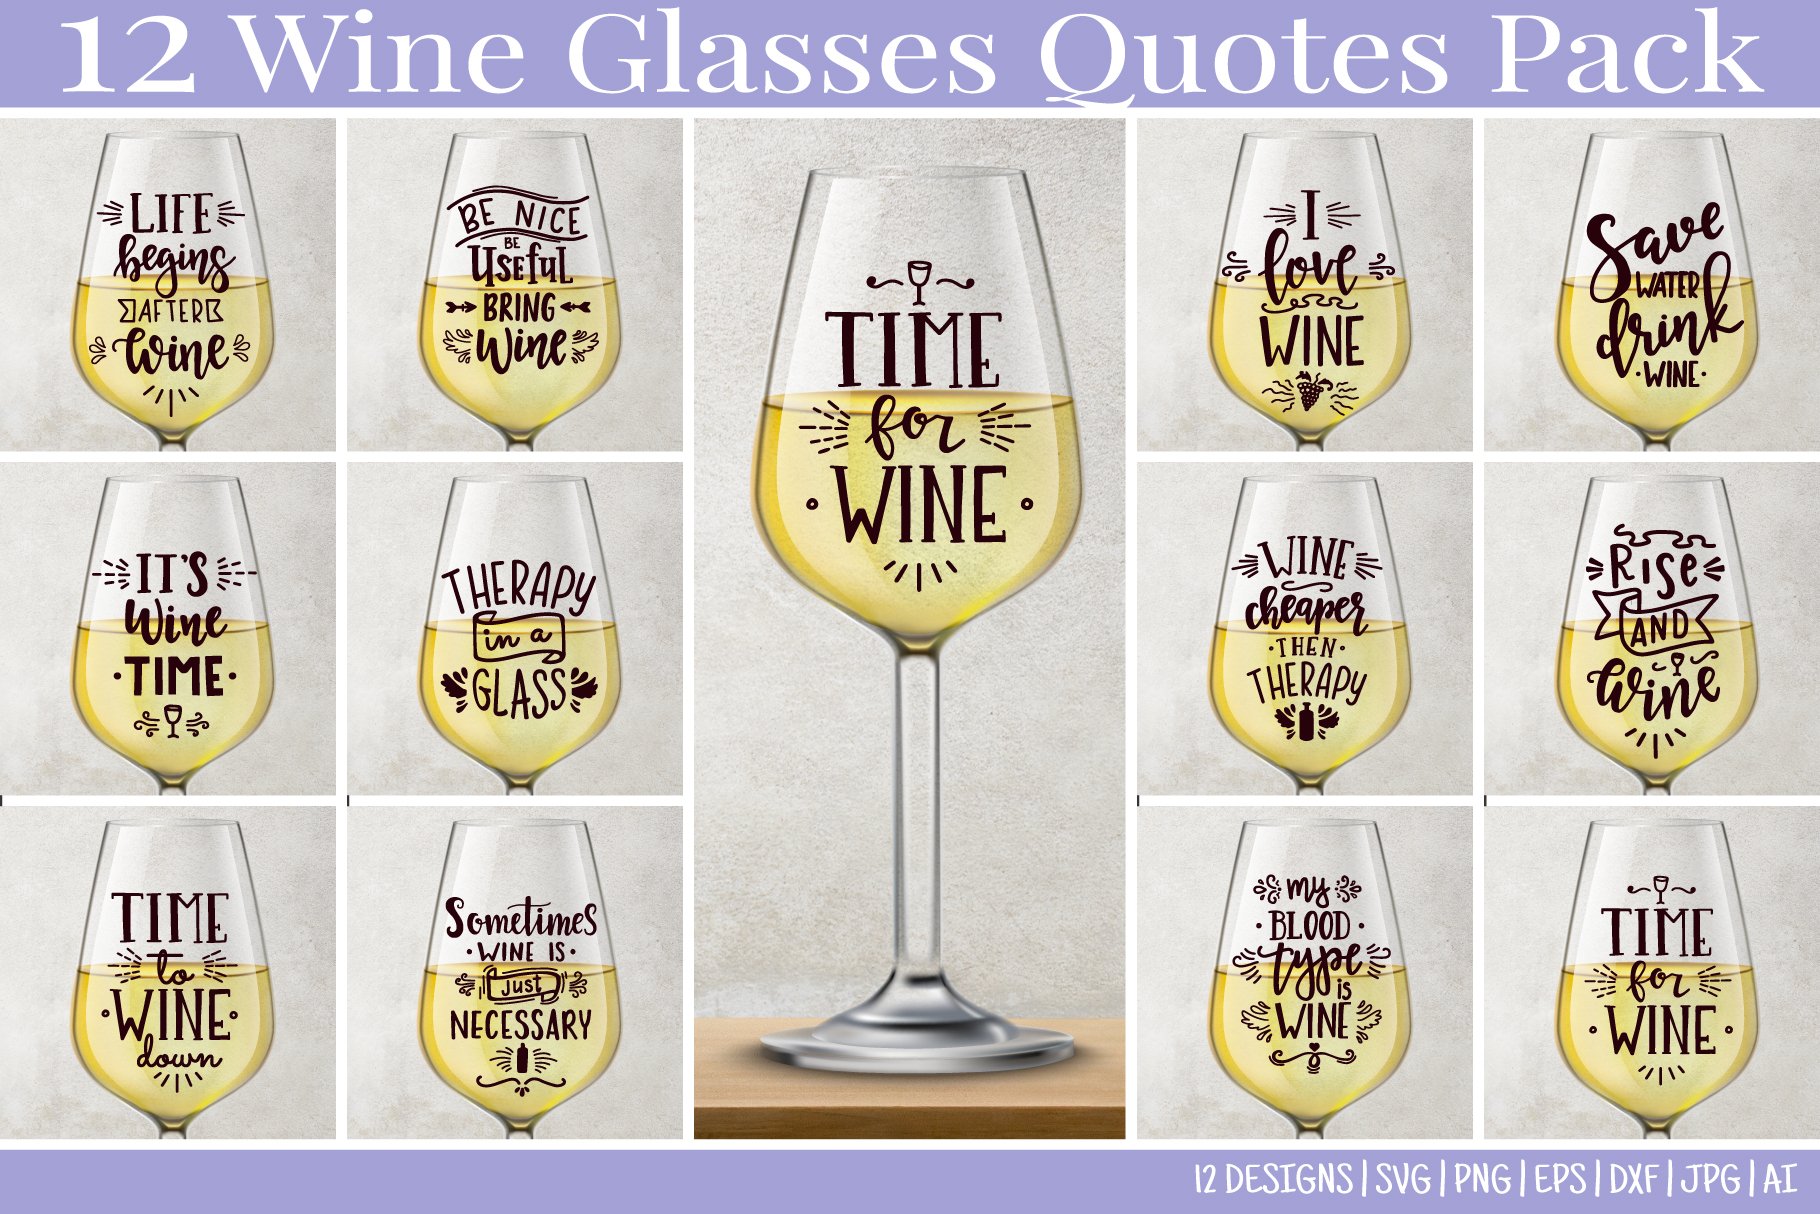 Interesting quotes on the wine glasses.